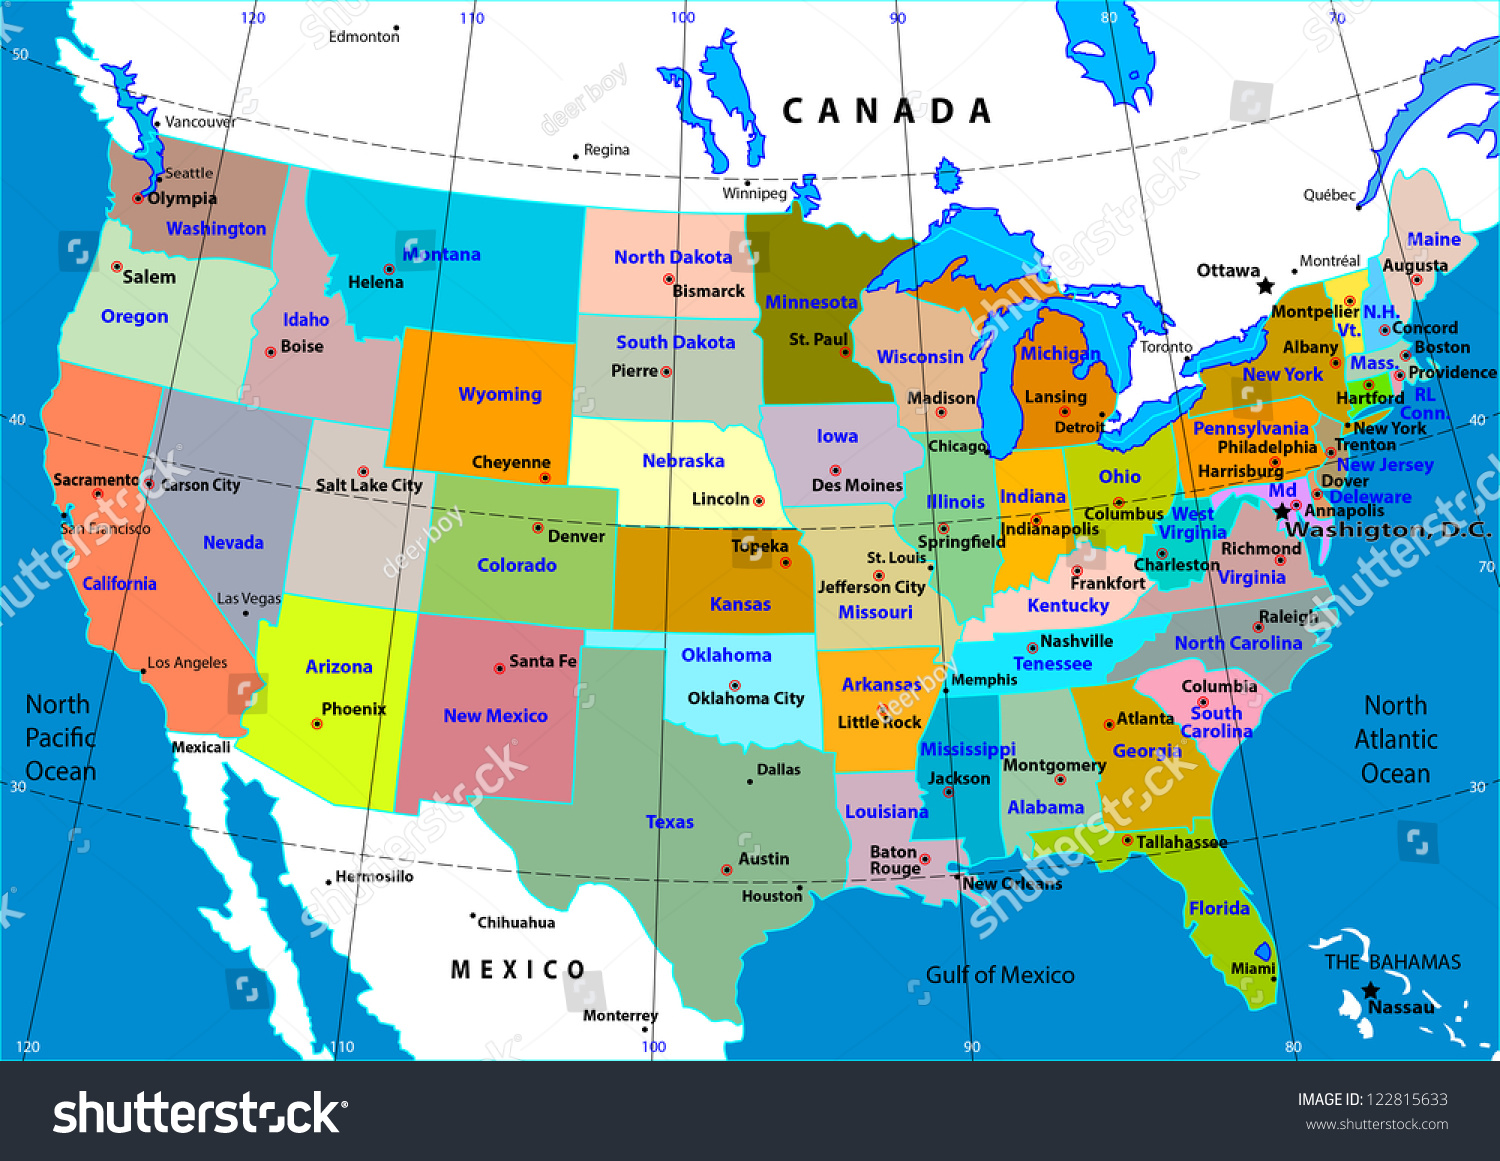 map of usa and canada with states and cities Colorful Usa Map States Capital Cities Stock Vector Royalty Free map of usa and canada with states and cities